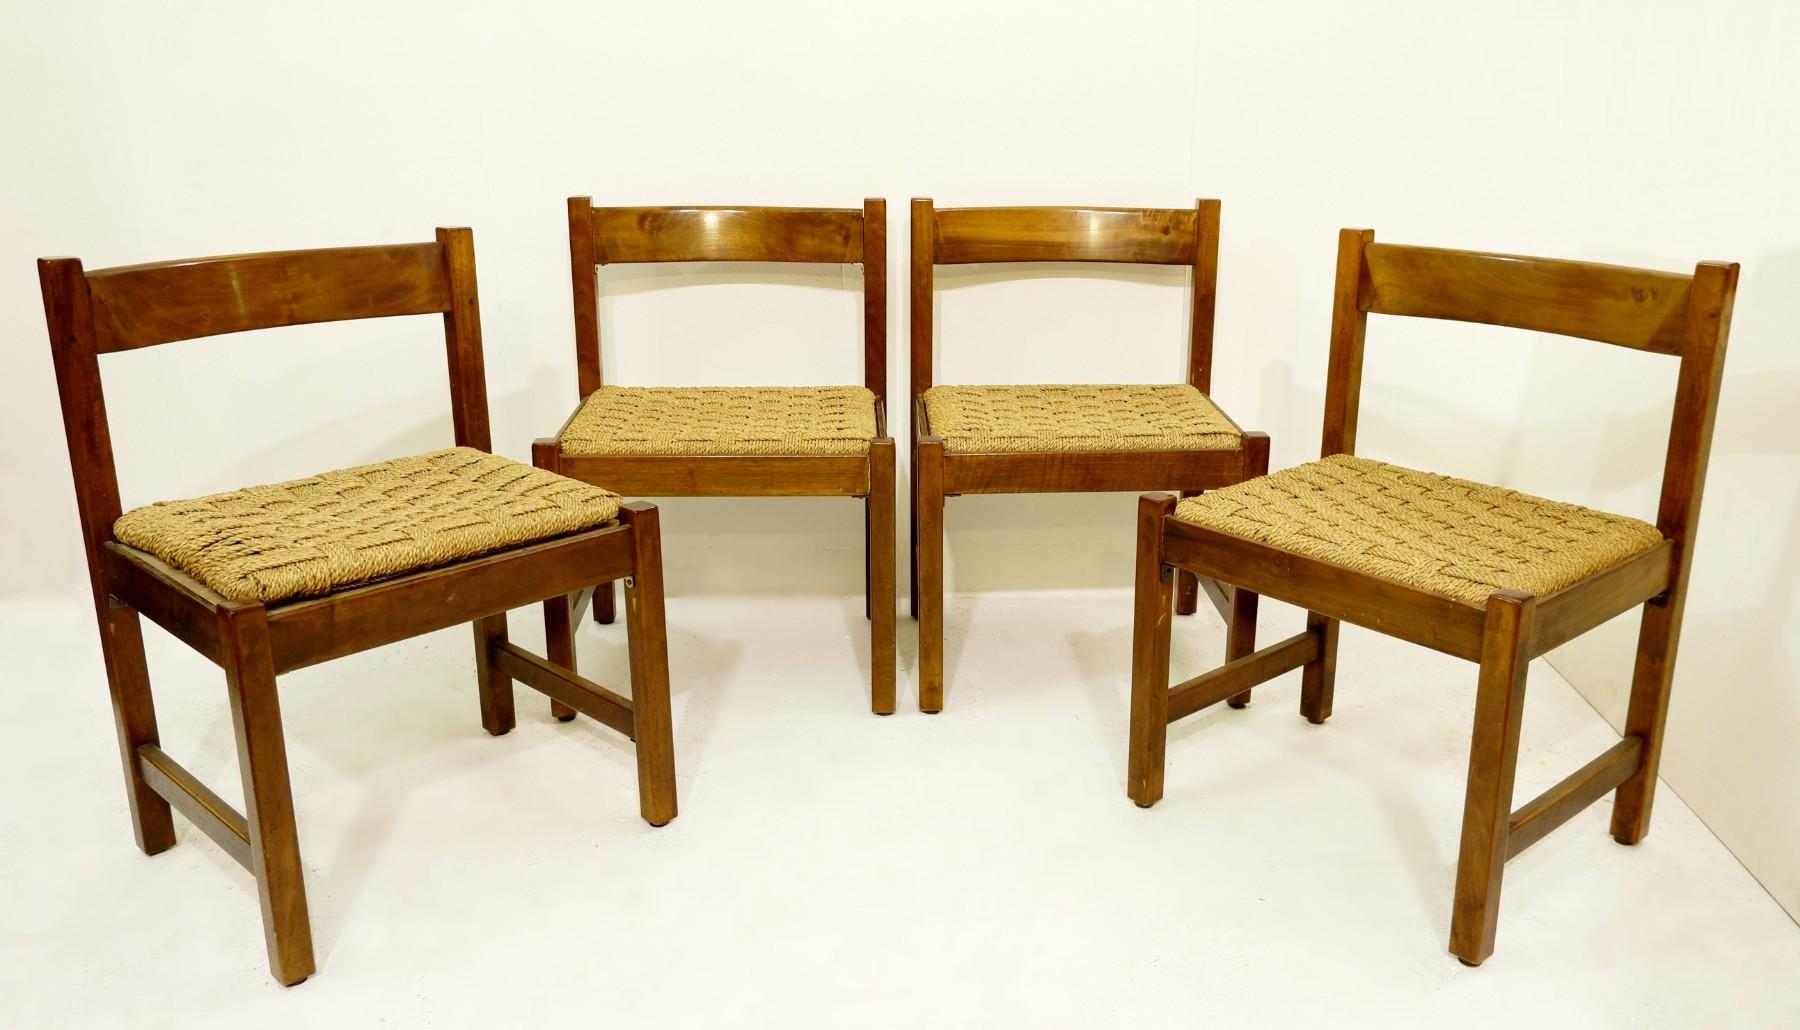 Wood Dining Room Furniture Including a Table and Four Chairs by Giovanni Michelucci 